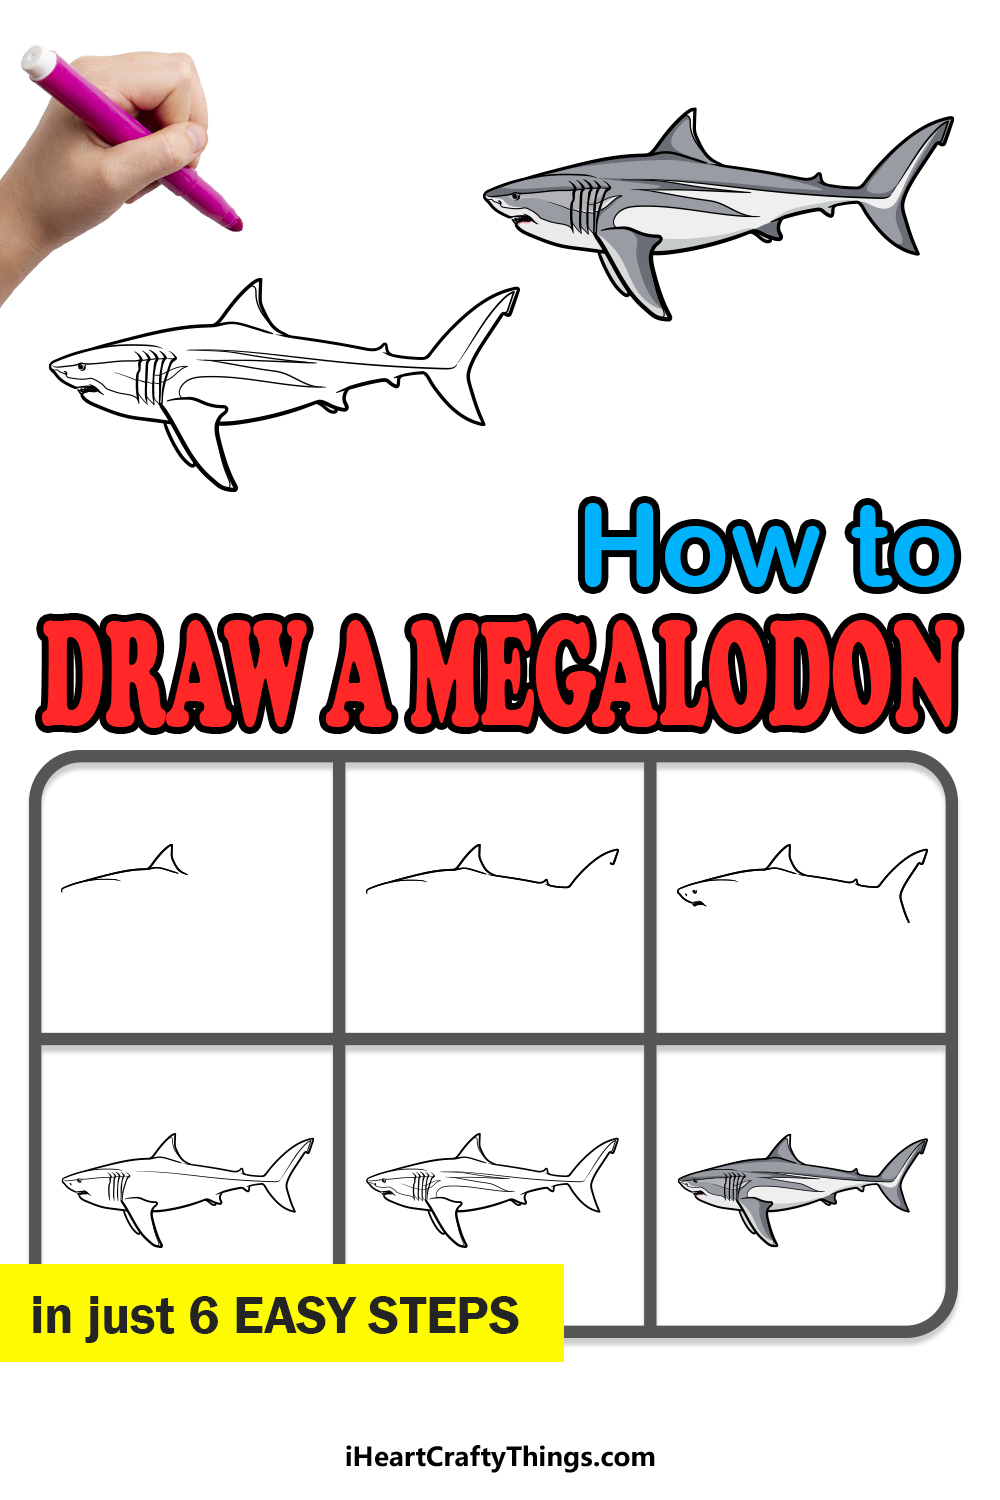 how to draw a megalodon in 6 easy steps